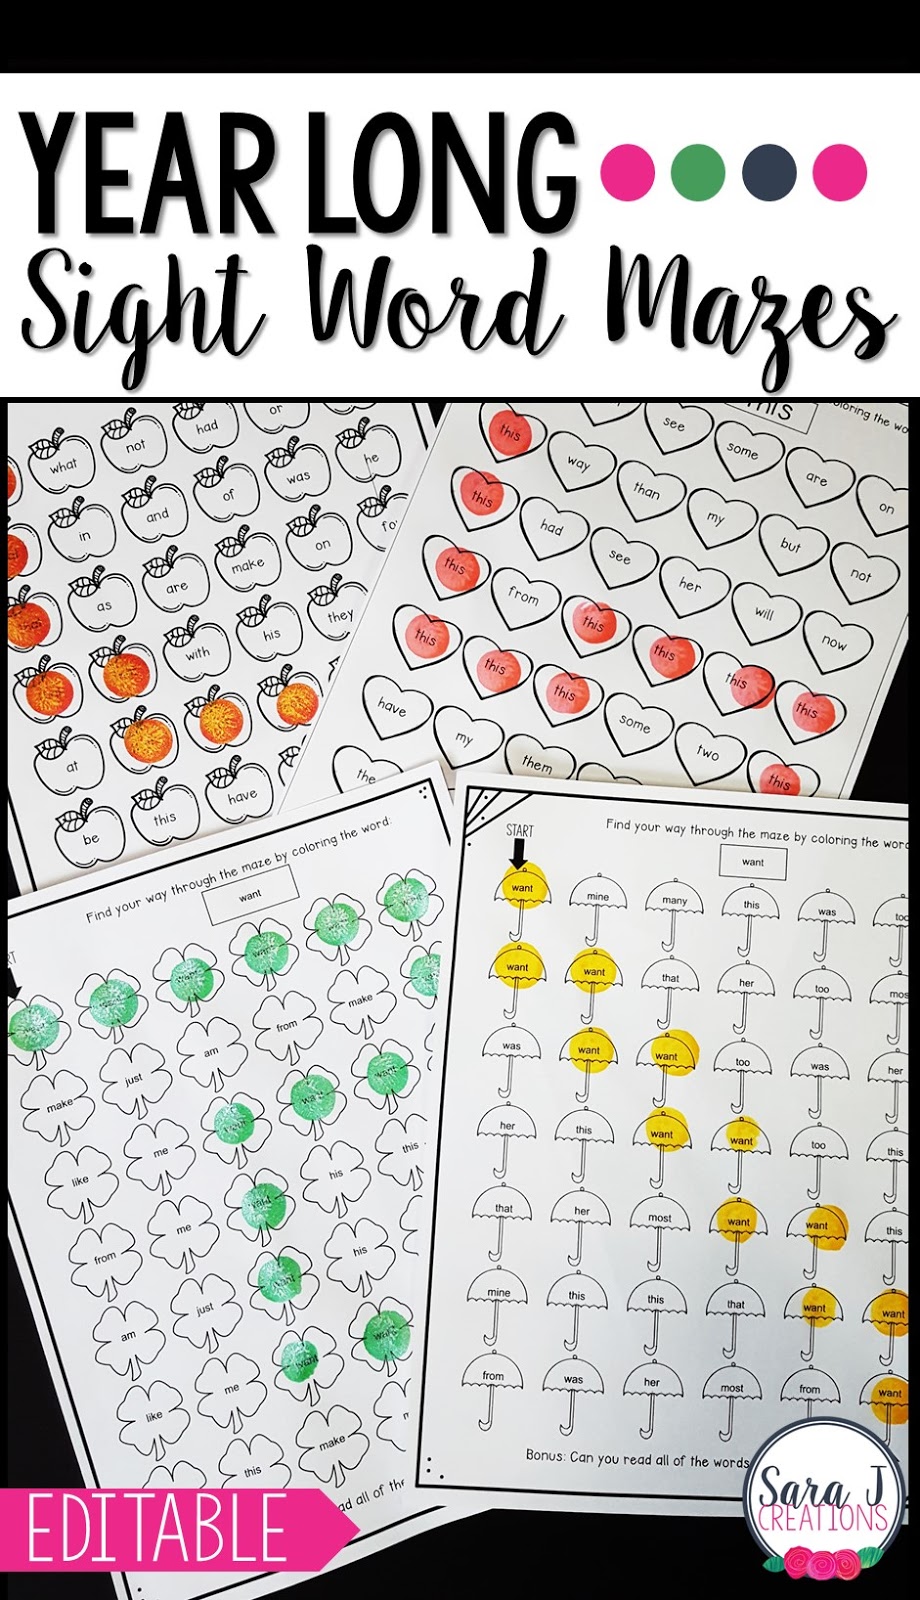 Sight word mazes (growing bundle) make the perfect printable practice activities for reviewing sight words.  Fully editable and different mazes for each month of the year - year round practice.